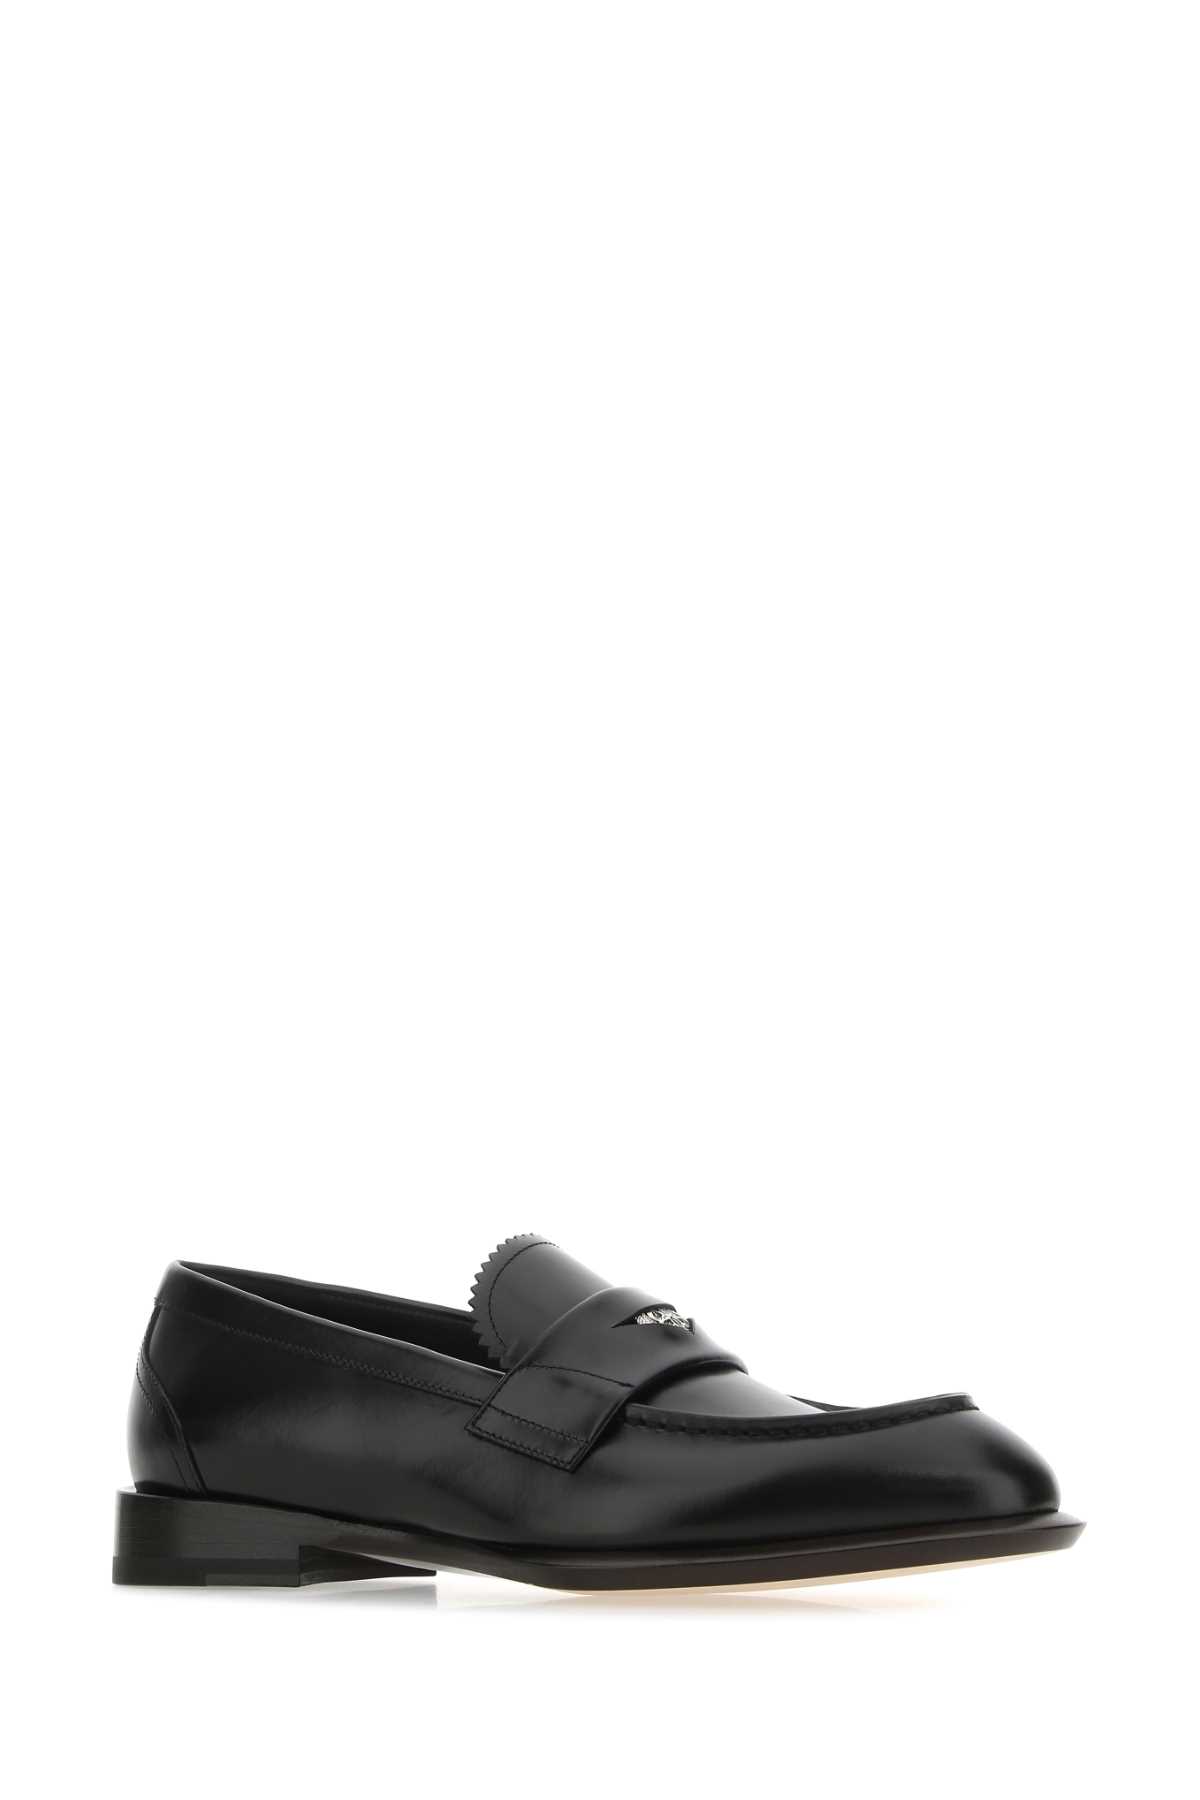 Alexander Mcqueen Black Leather Loafers In 1530